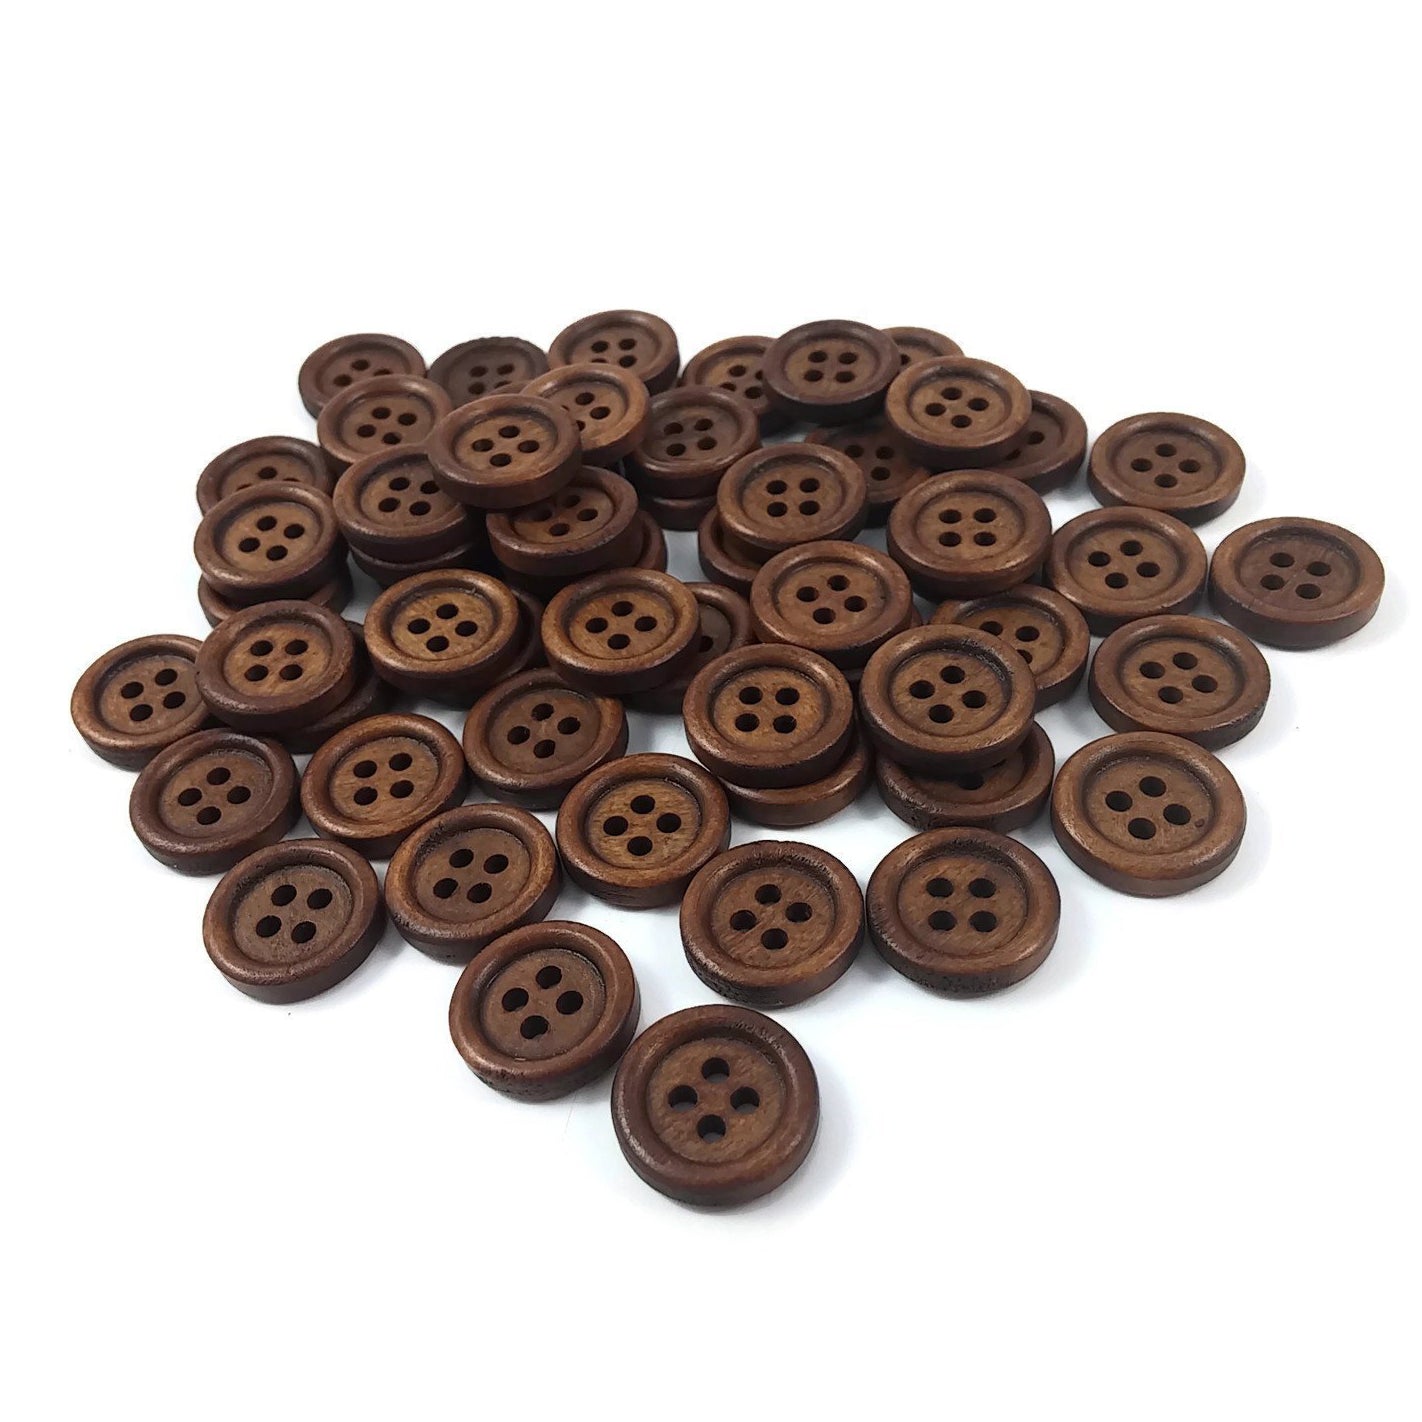 Wholesale Wooden button - Brown 4 Holes Wood Sewing Buttons 15mm - set of 60